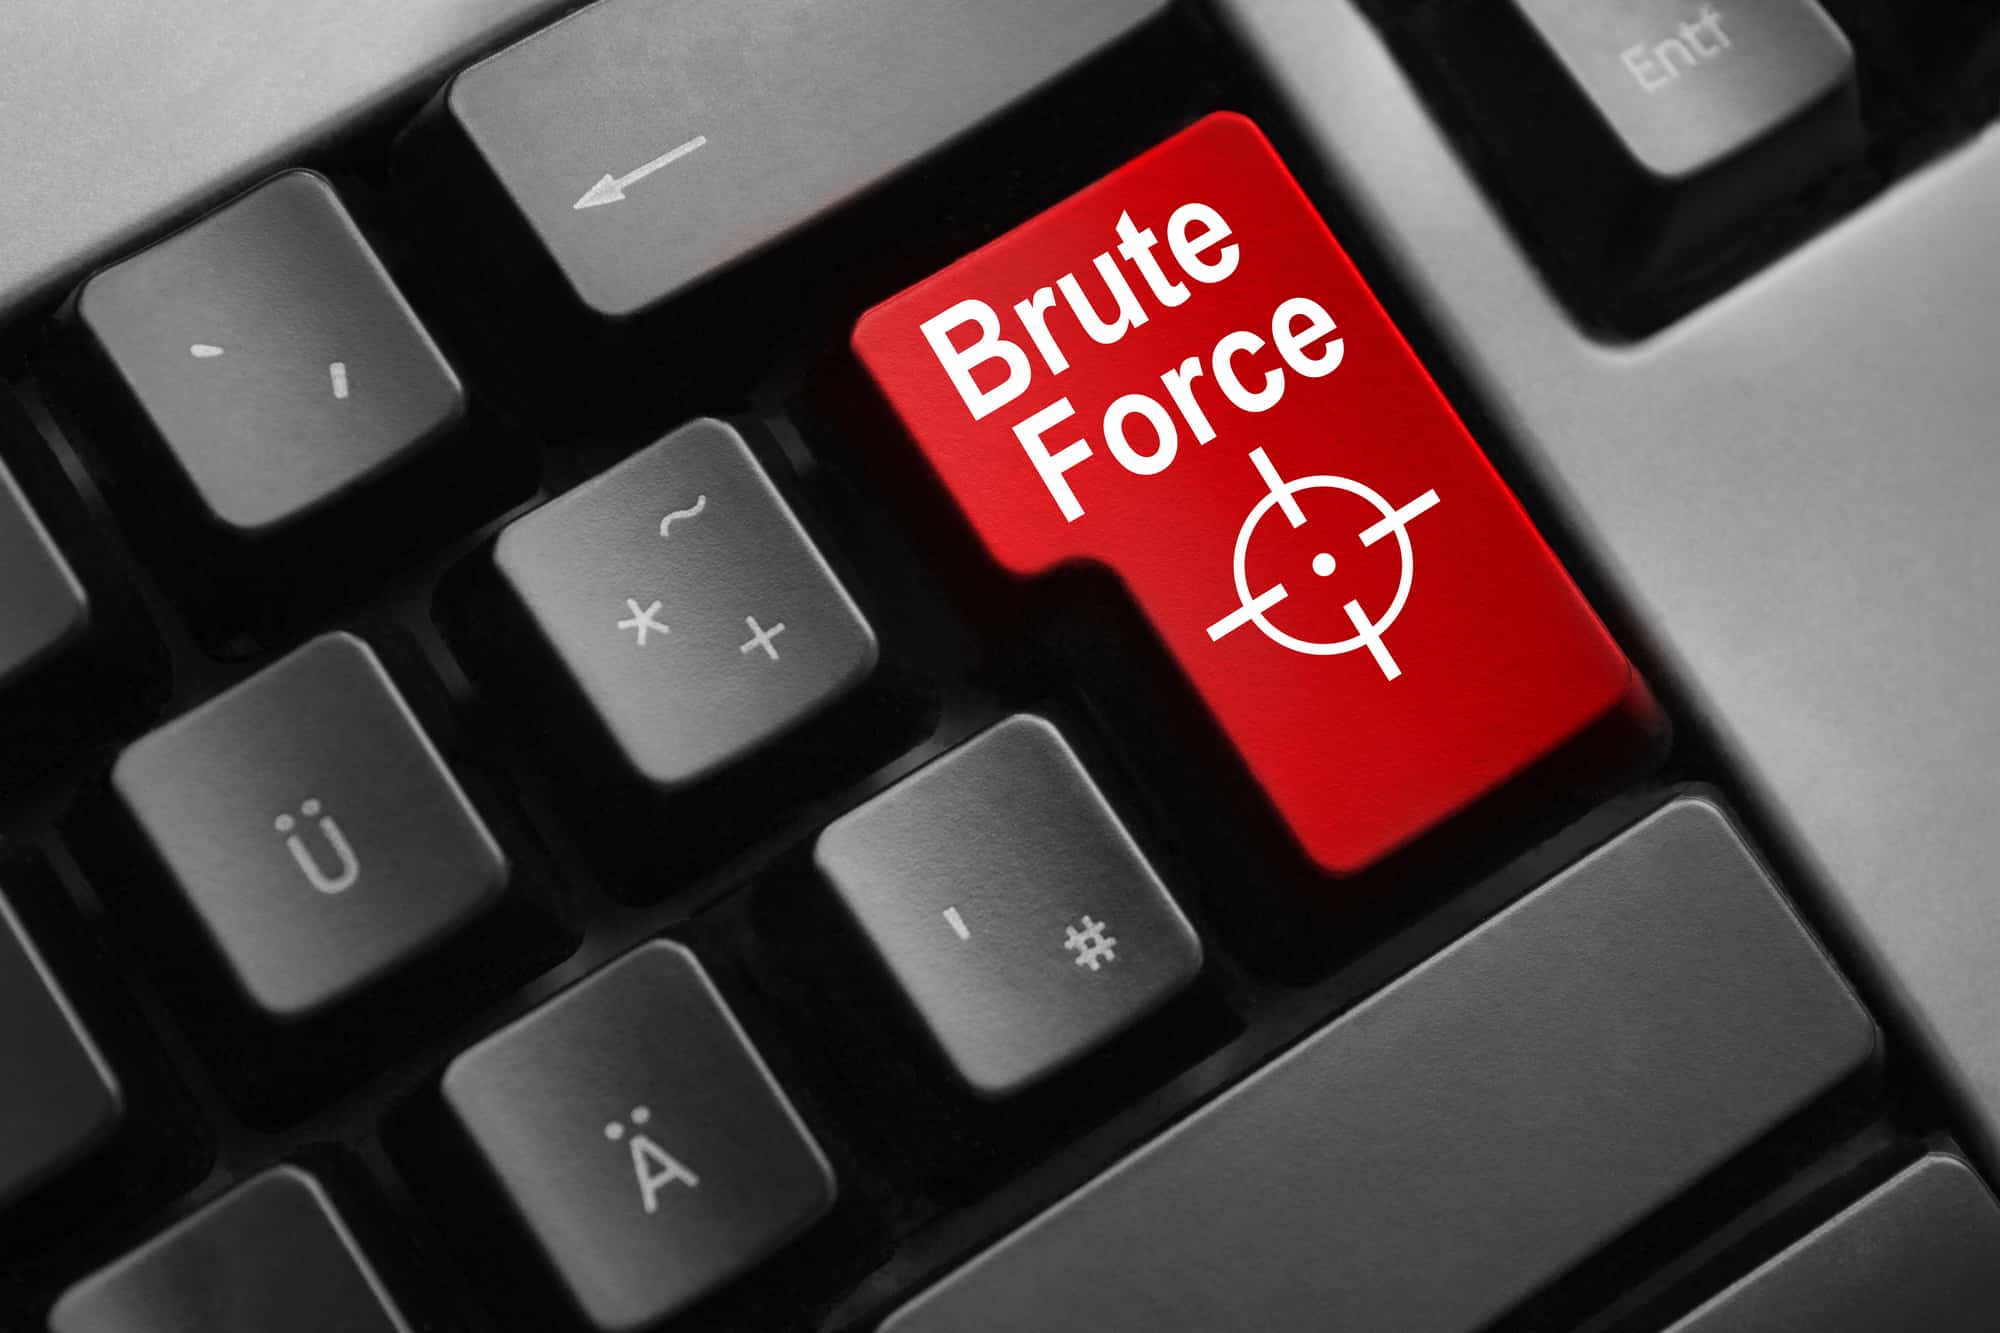 Brute Force Attack: what is it and how to prevent it brute force attack,brute force attack tool,brute force attack prevention